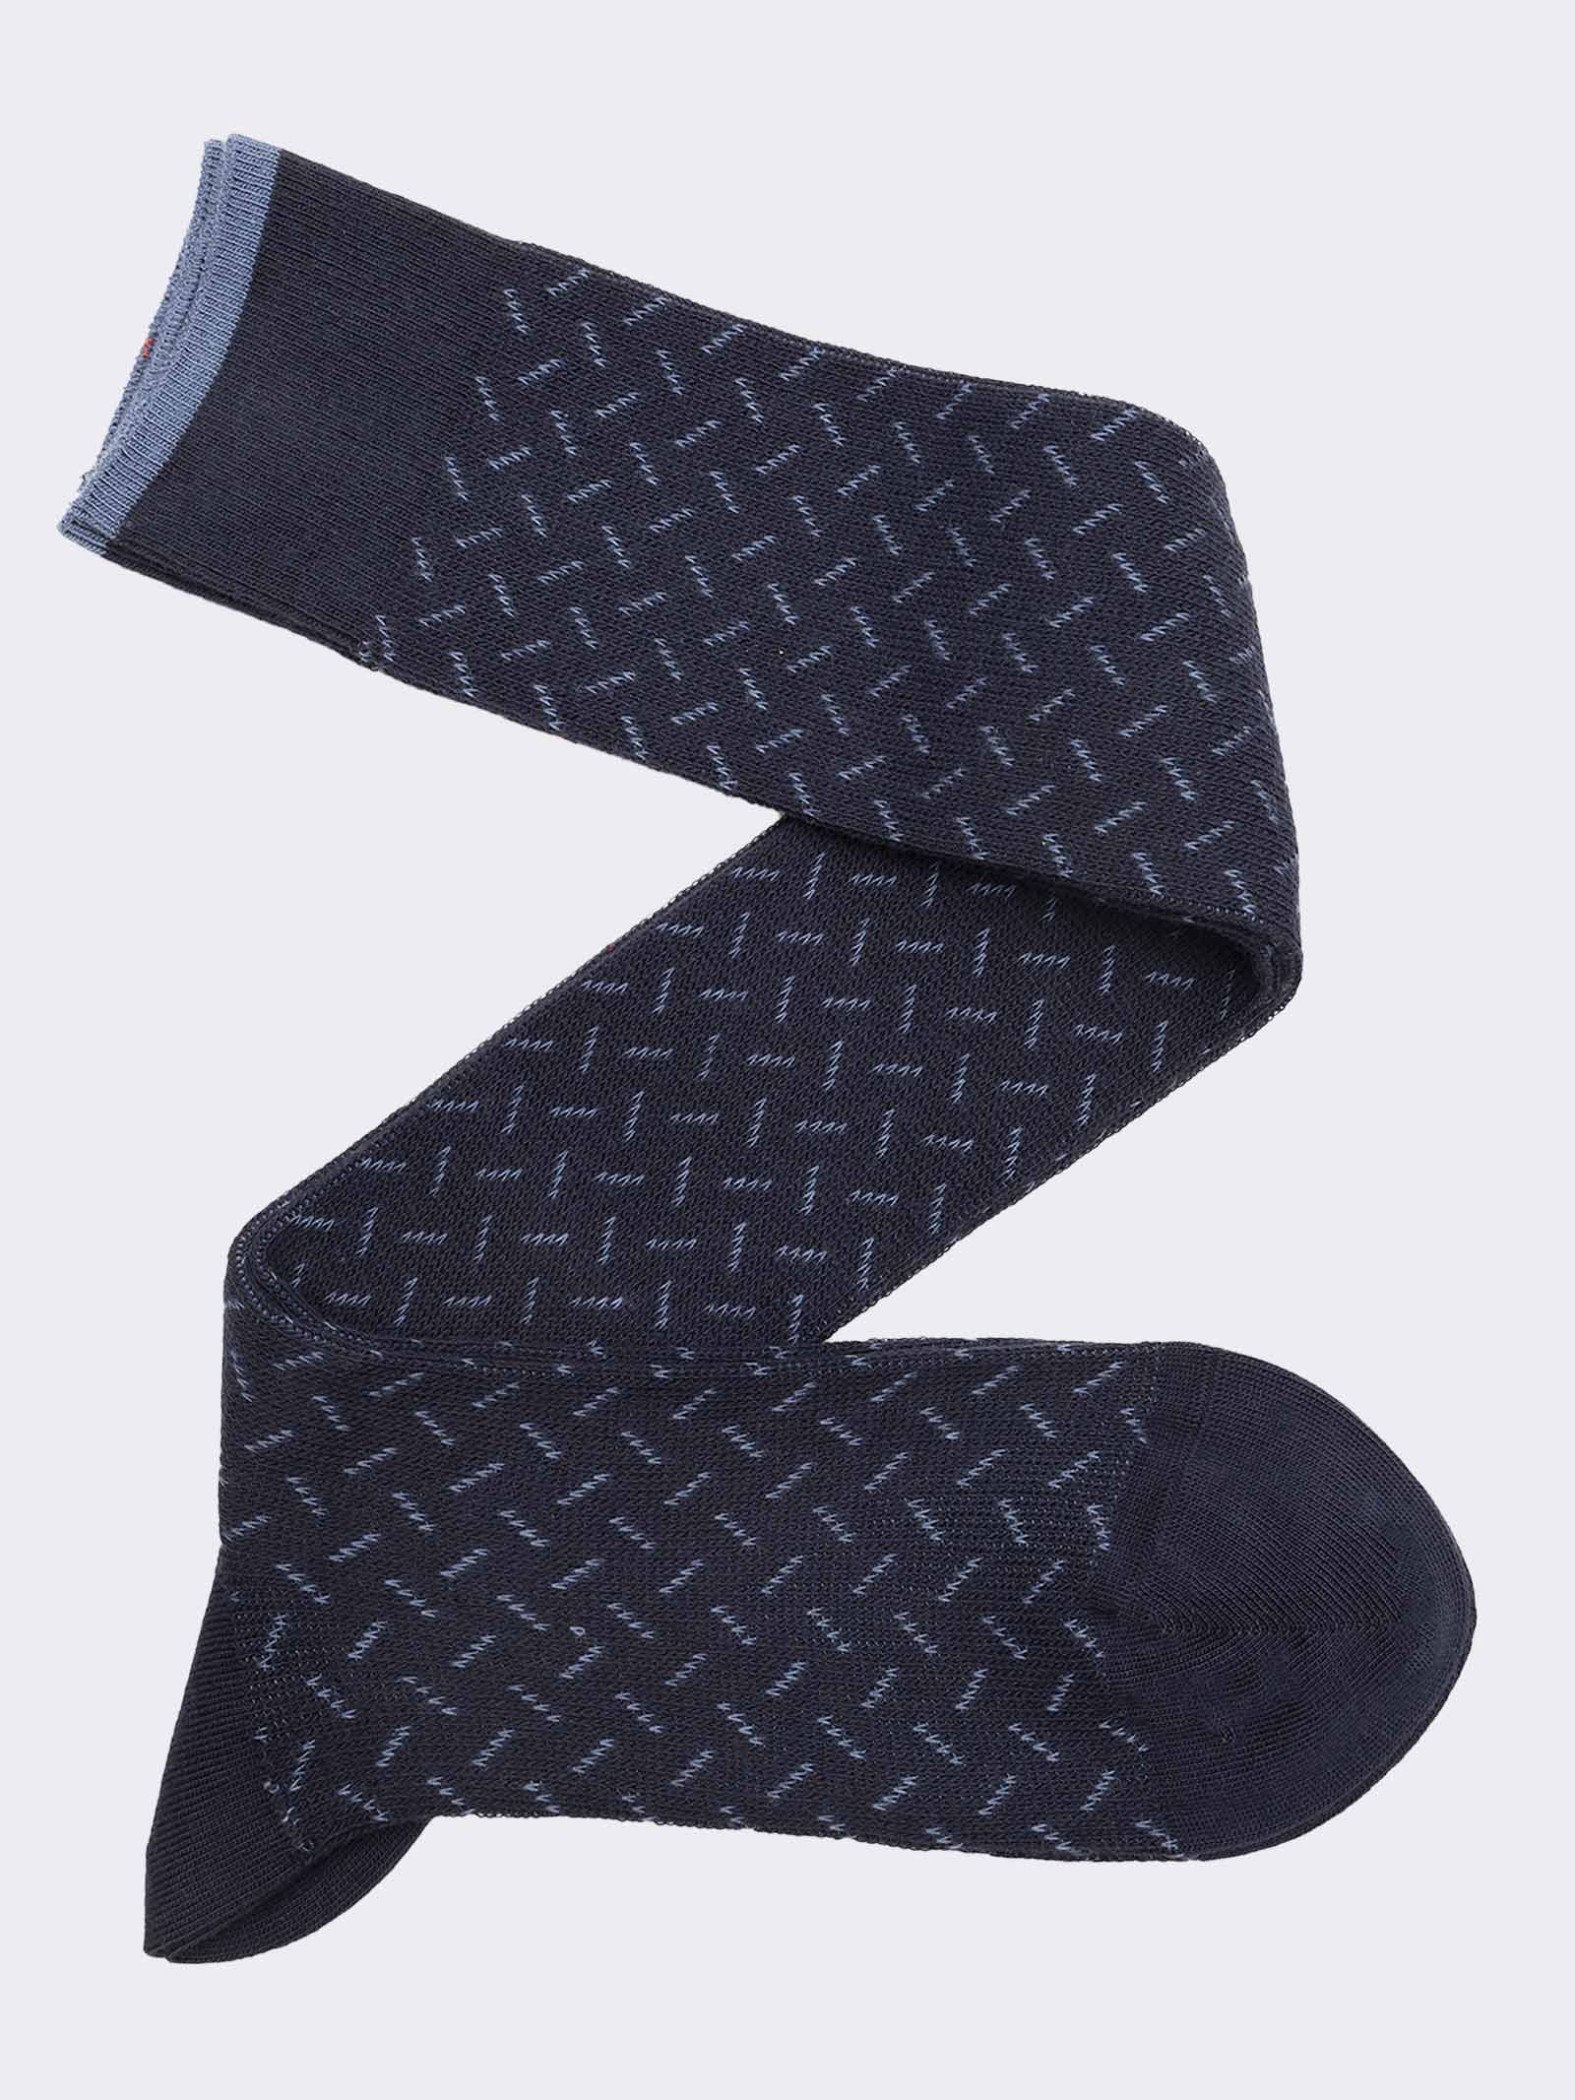 Men's patterned Knee high socks in warm cotton - Made in Italy